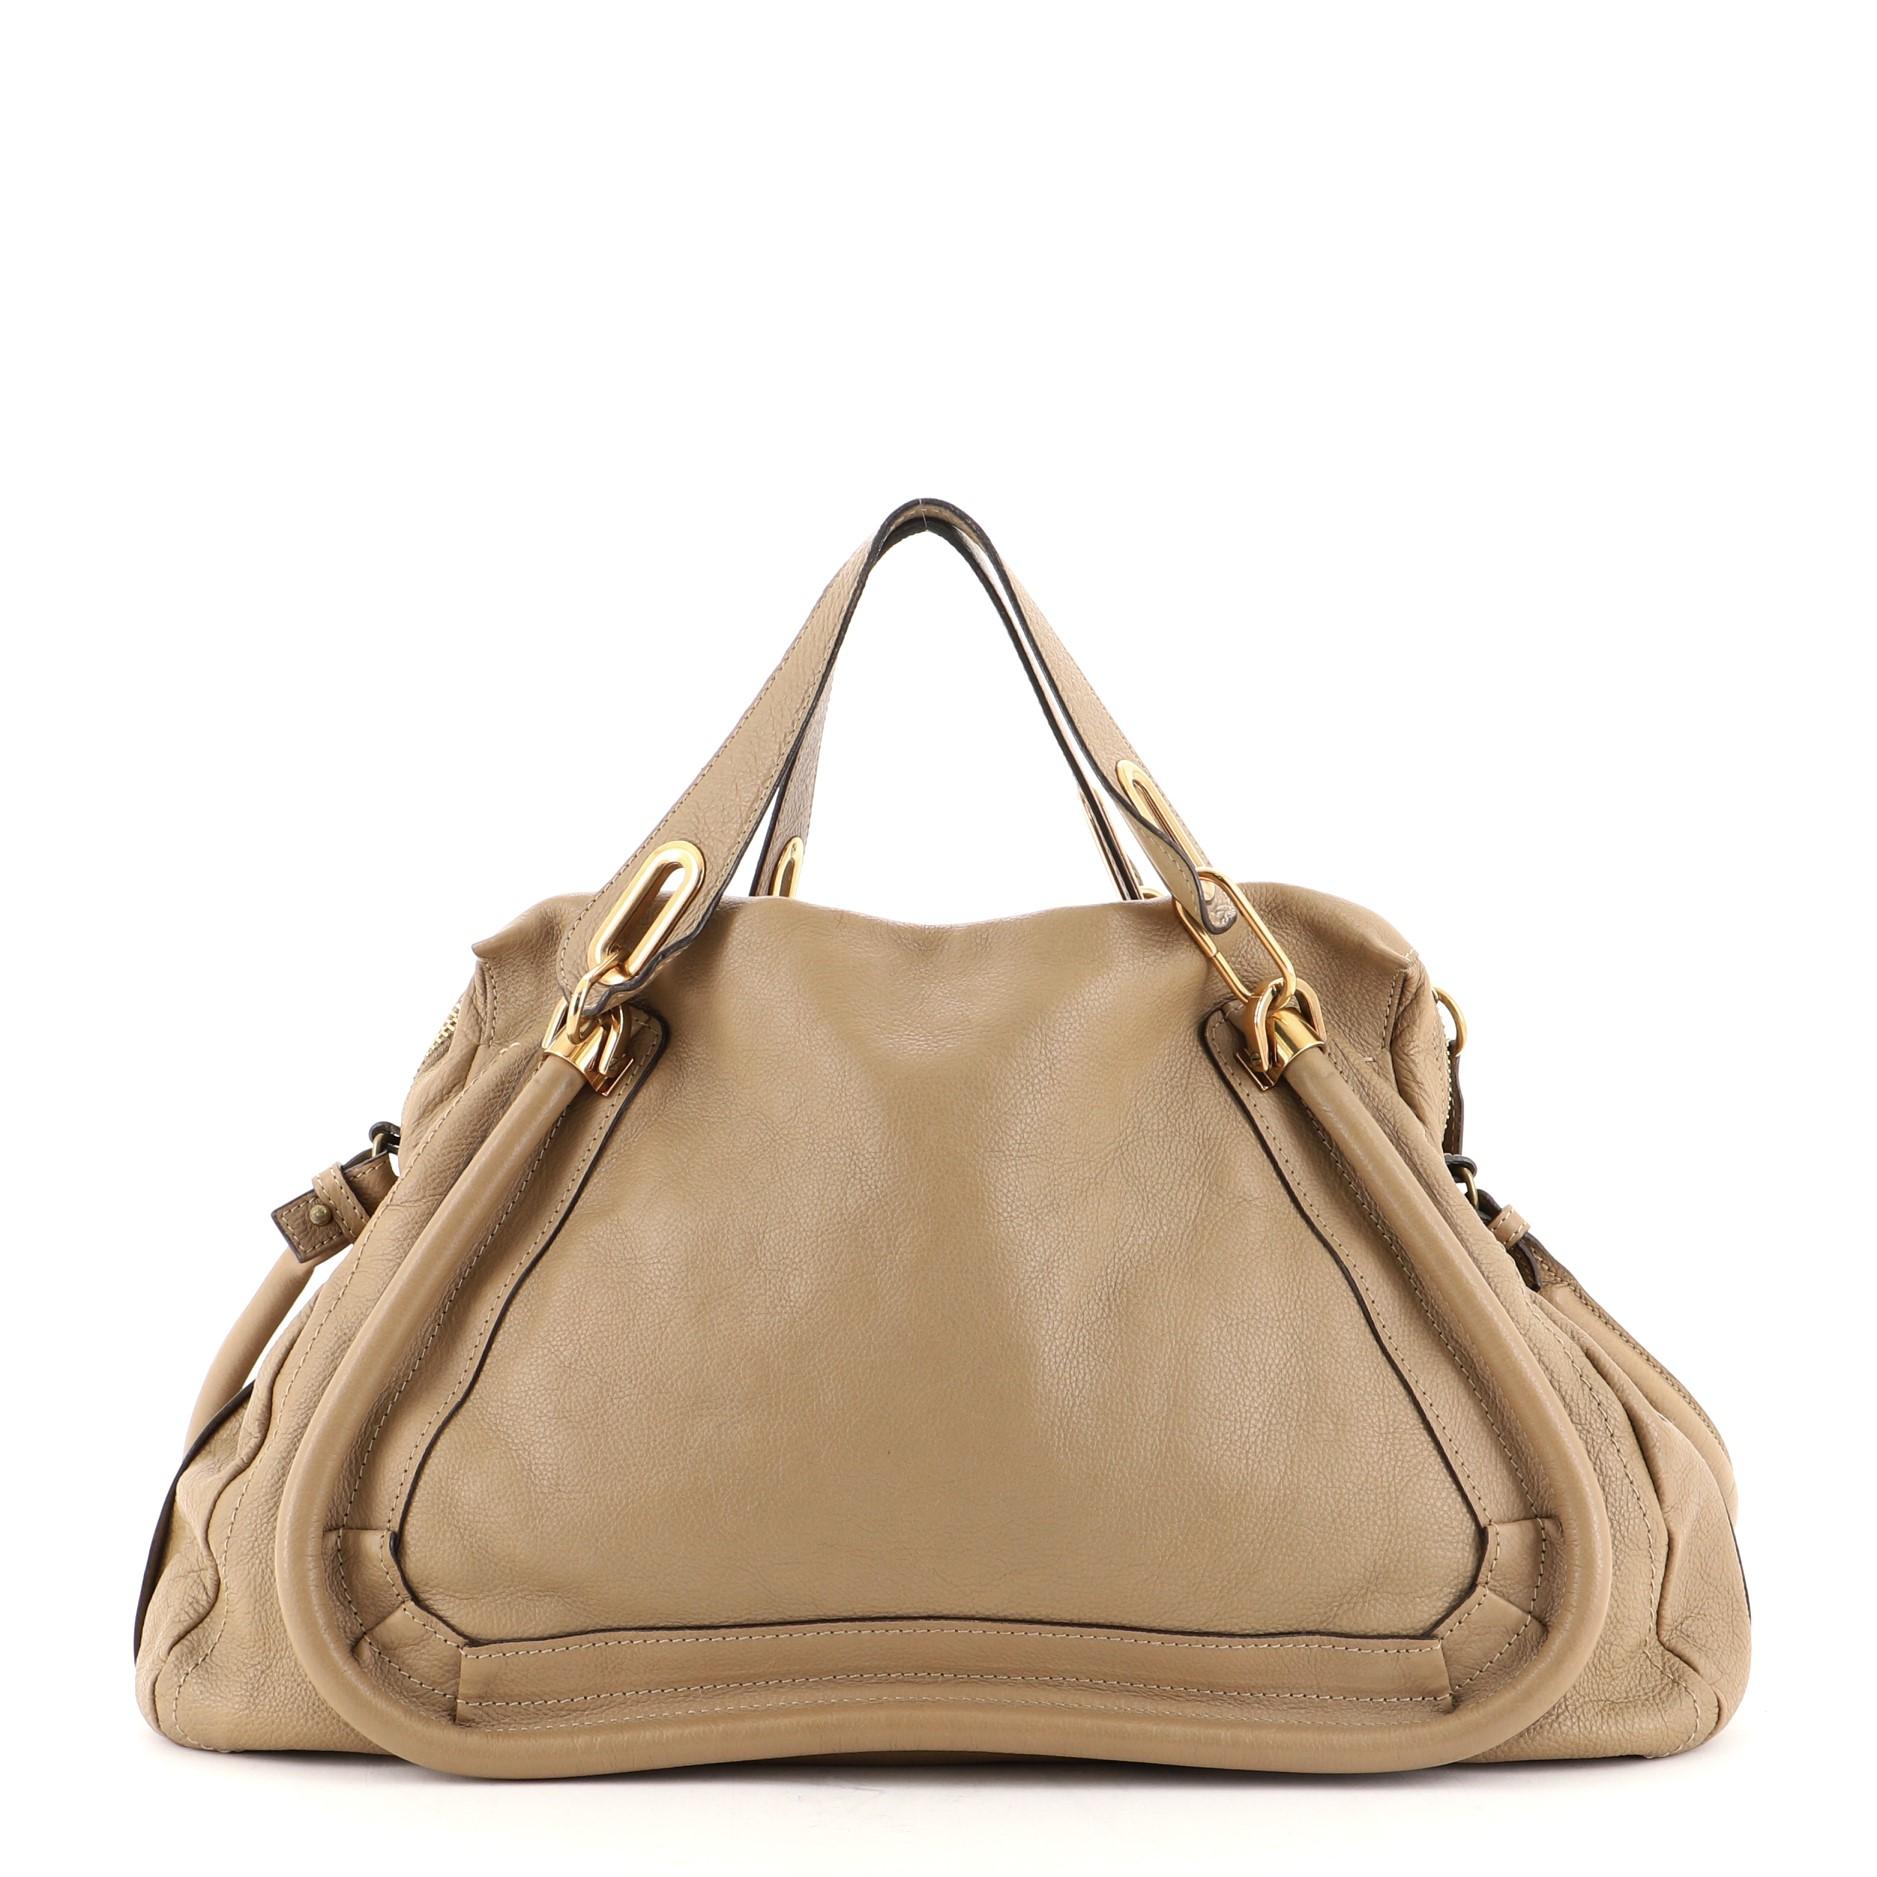 Chloe Paraty Top Handle Bag Leather Large
Neutral

Condition Details: Creasing on exterior, minor wear on opening corners, handles and strap small indentations on exterior trims. Heavy splitting and cracking on handle, opening and strap wax edges,